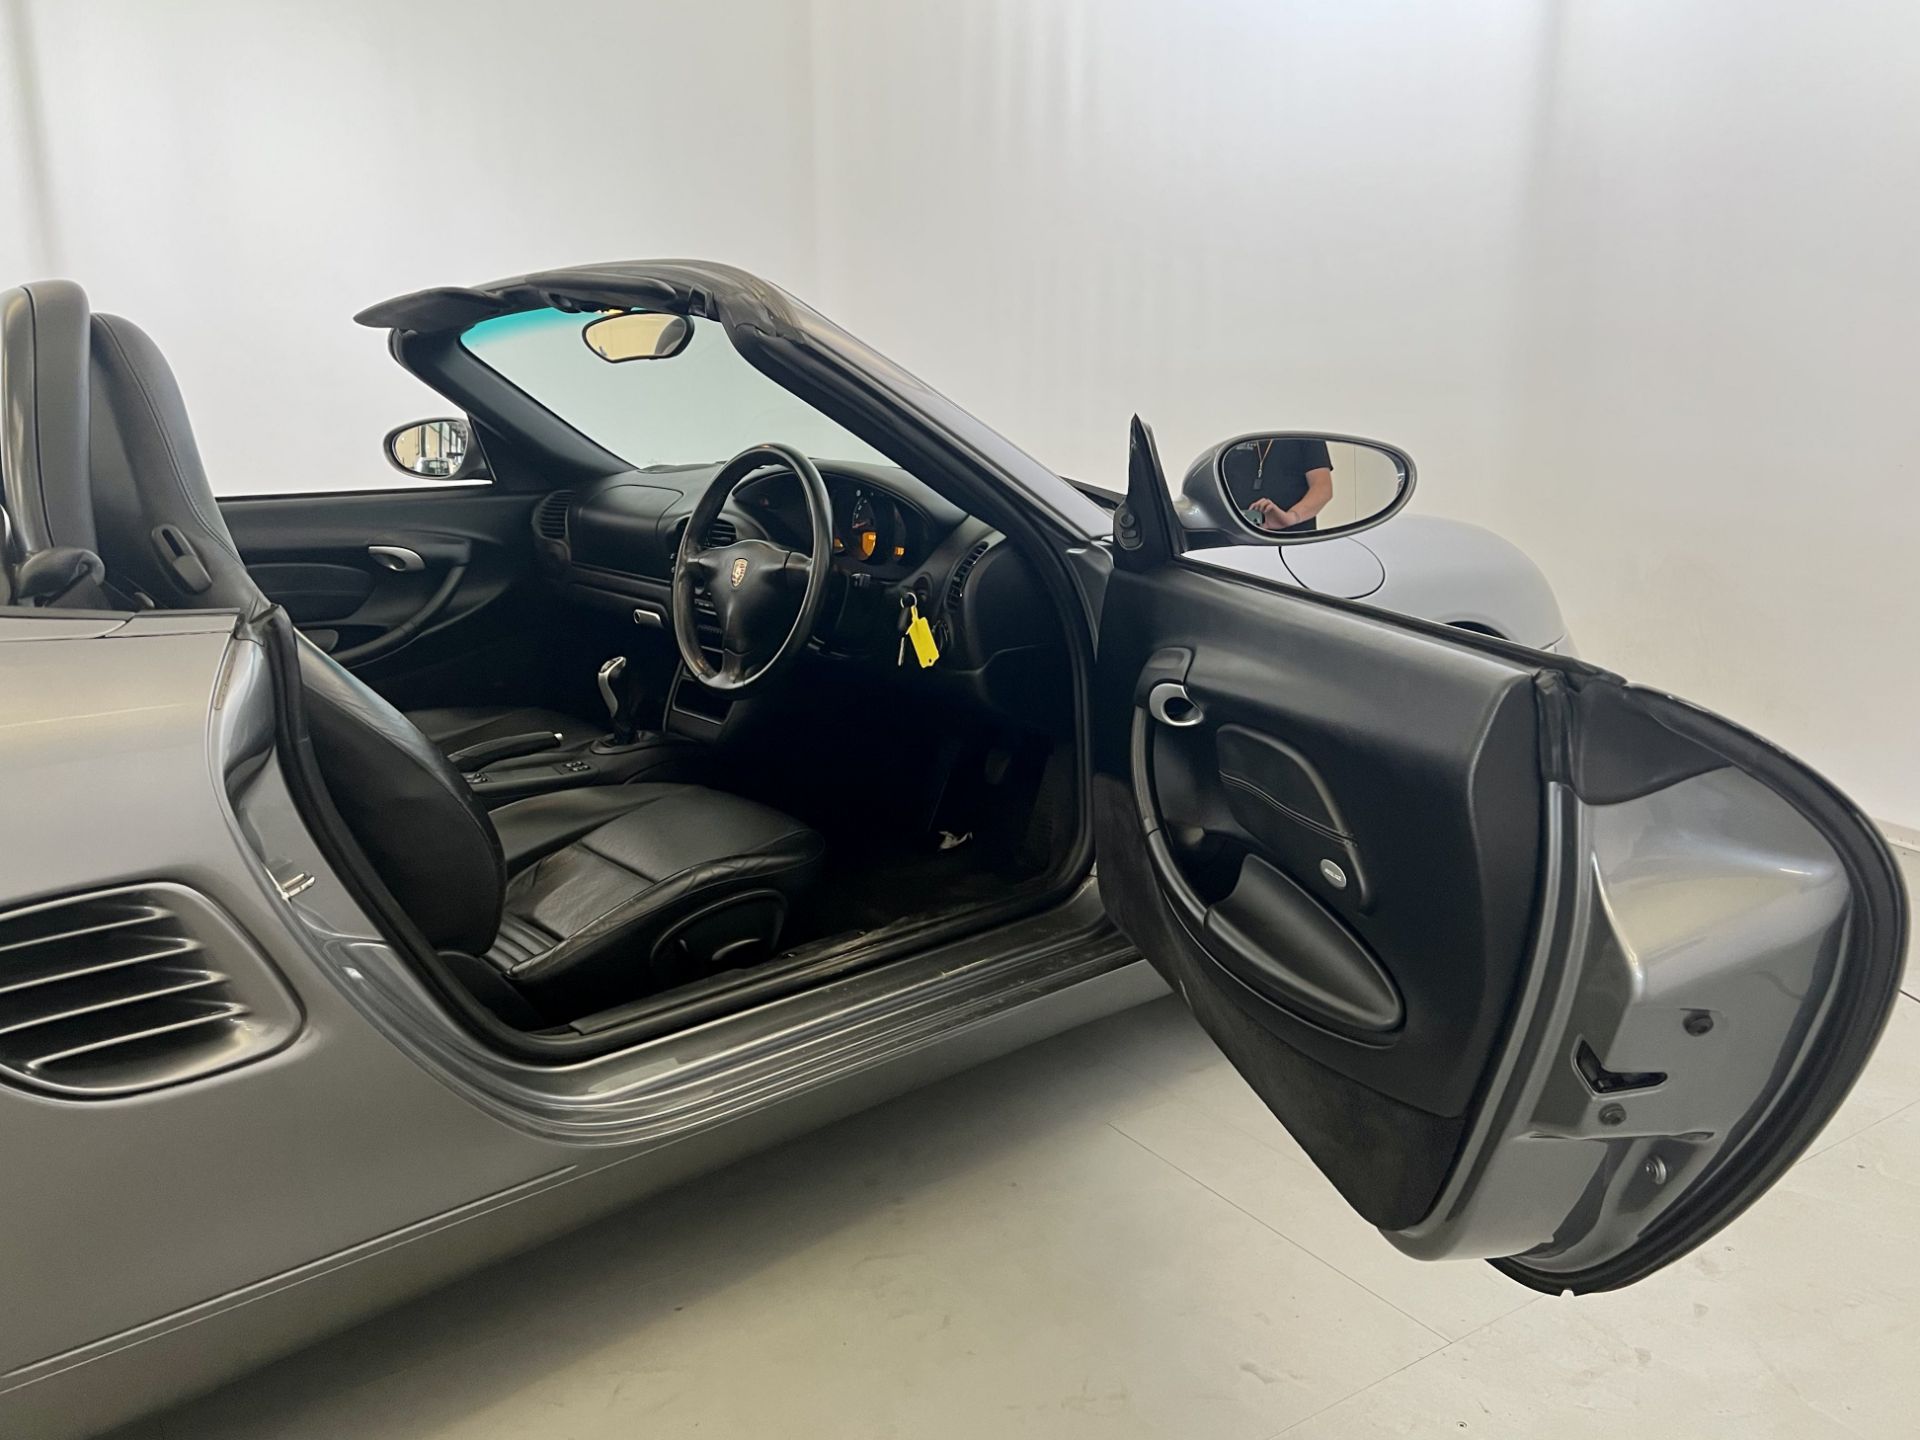 Porshe Boxster - Image 17 of 31